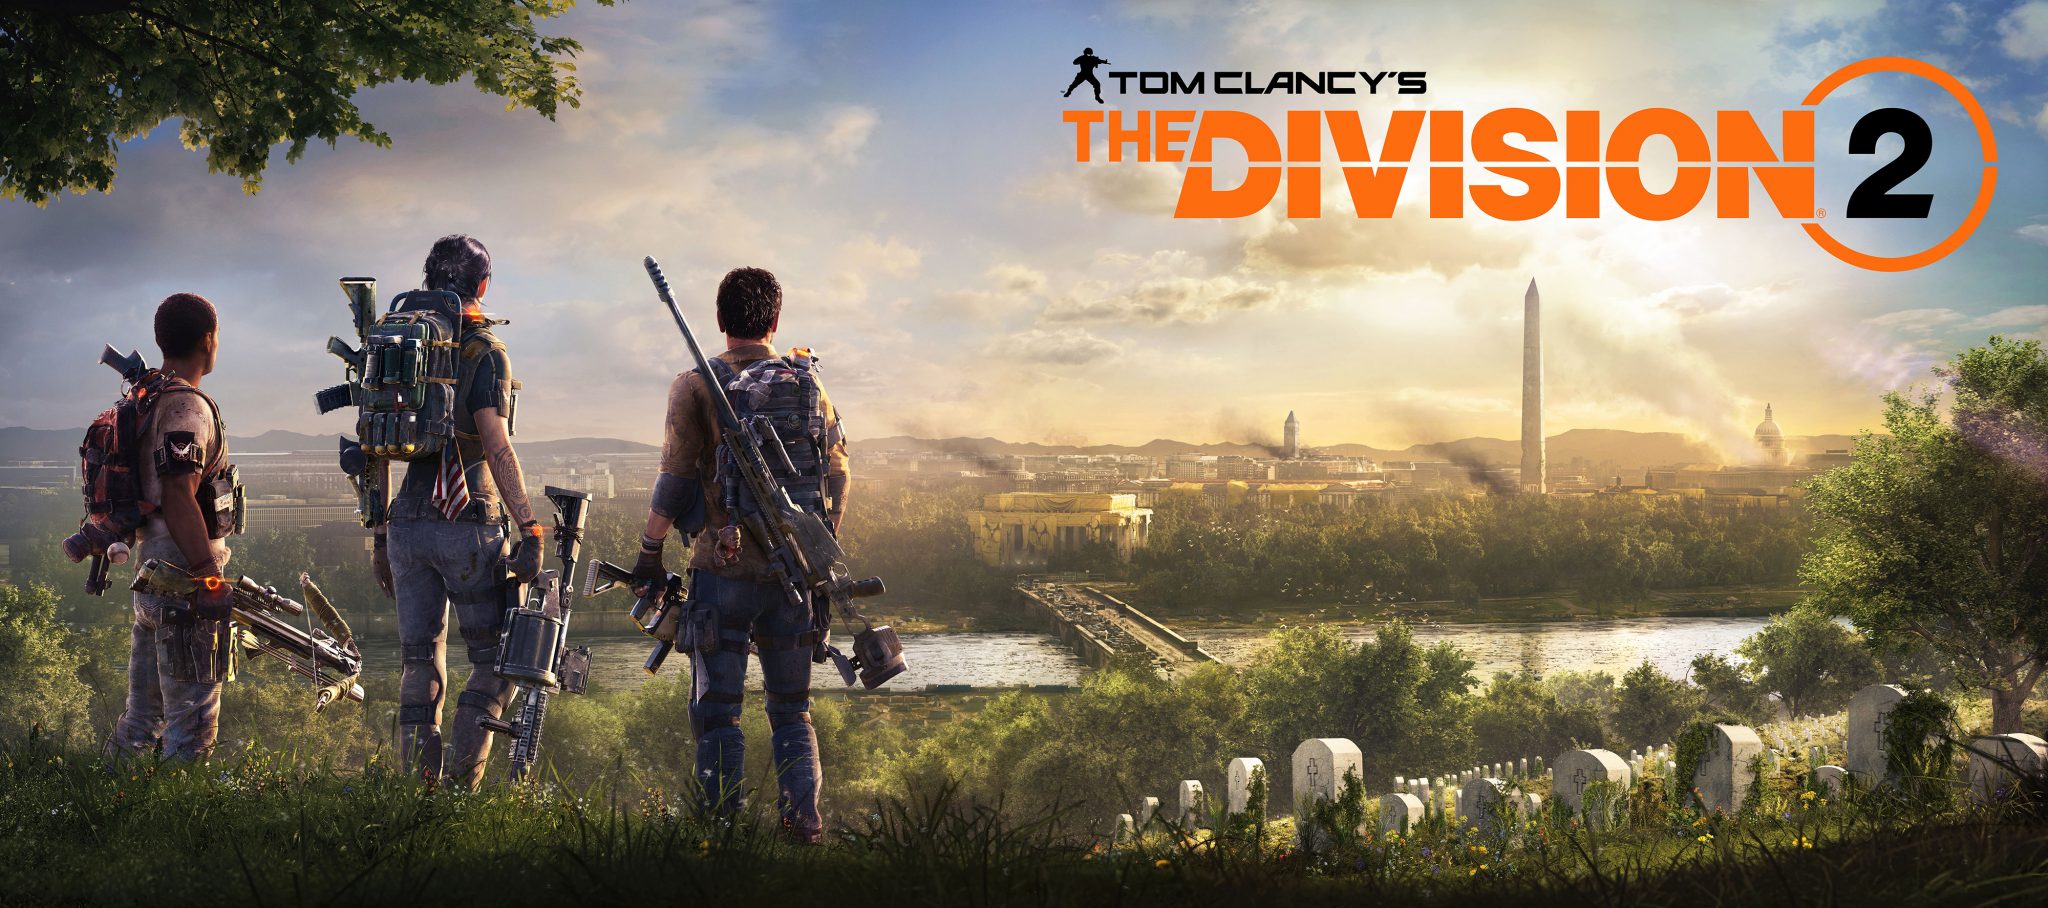 The Division 2 PS4 Review - to DC Thumb Culture